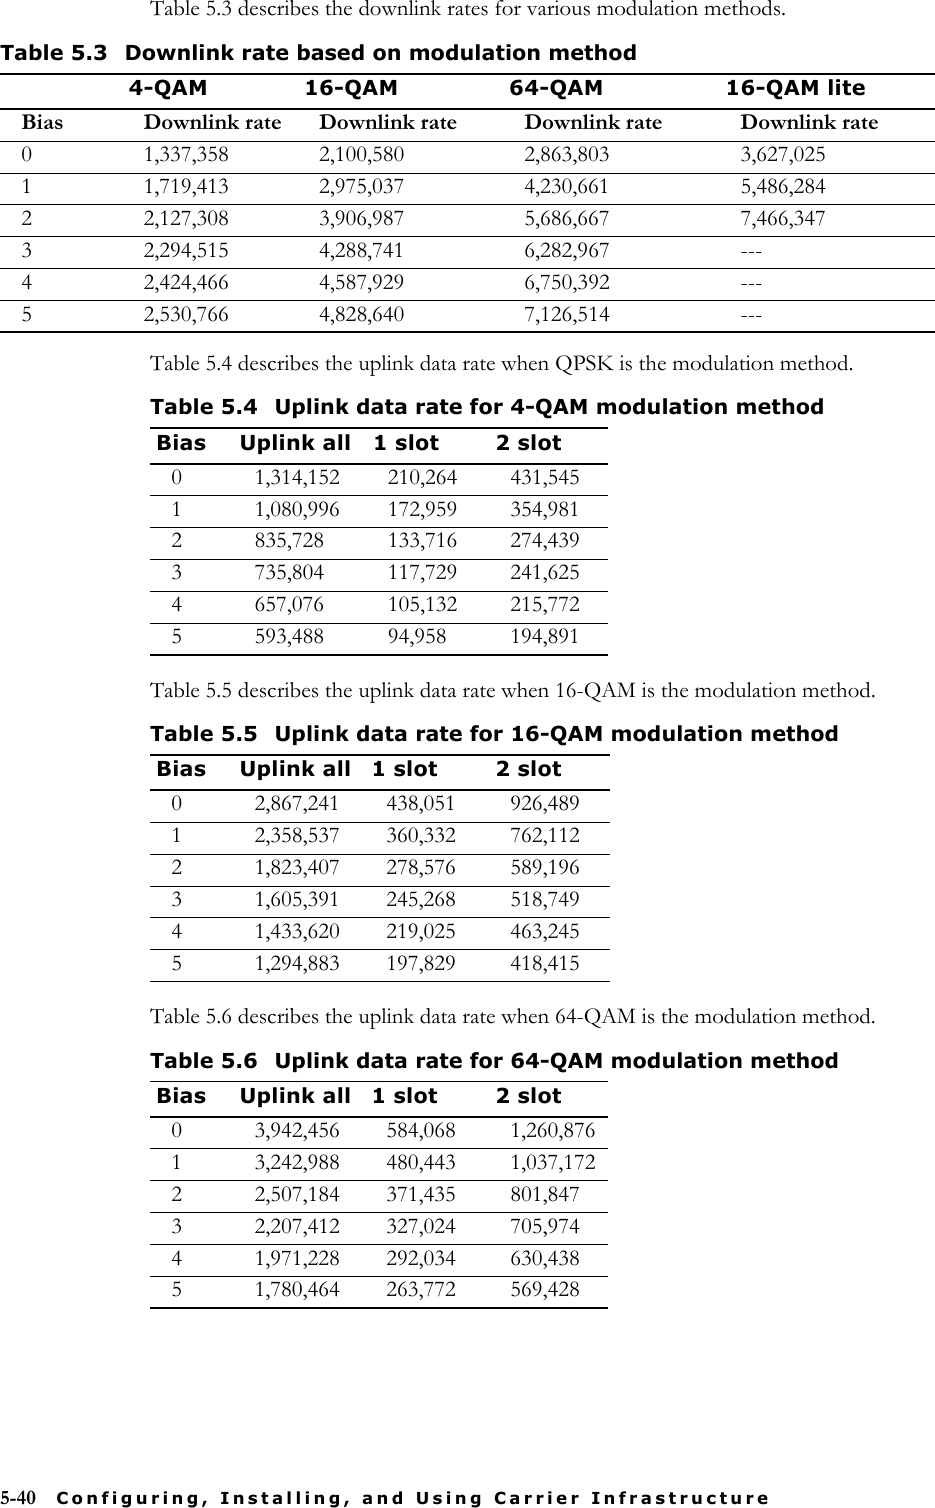 5-40 Configuring, Installing, and Using Carrier InfrastructureTable 5.3 describes the downlink rates for various modulation methods.Table 5.4 describes the uplink data rate when QPSK is the modulation method.Table 5.5 describes the uplink data rate when 16-QAM is the modulation method.Table 5.6 describes the uplink data rate when 64-QAM is the modulation method.Table 5.3 Downlink rate based on modulation method4-QAM 16-QAM 64-QAM 16-QAM liteBias Downlink rate Downlink rate Downlink rate Downlink rate0 1,337,358 2,100,580 2,863,803 3,627,0251 1,719,413 2,975,037 4,230,661 5,486,2842 2,127,308 3,906,987 5,686,667 7,466,3473 2,294,515 4,288,741 6,282,967 ---4 2,424,466 4,587,929 6,750,392 ---5 2,530,766 4,828,640 7,126,514 ---Table 5.4 Uplink data rate for 4-QAM modulation methodBias Uplink all 1 slot 2 slot0 1,314,152 210,264 431,5451 1,080,996 172,959 354,9812 835,728 133,716 274,4393 735,804 117,729 241,6254 657,076 105,132 215,7725 593,488 94,958 194,891Table 5.5 Uplink data rate for 16-QAM modulation methodBias Uplink all 1 slot 2 slot0 2,867,241 438,051 926,4891 2,358,537 360,332 762,1122 1,823,407 278,576 589,1963 1,605,391 245,268 518,7494 1,433,620 219,025 463,2455 1,294,883 197,829 418,415Table 5.6 Uplink data rate for 64-QAM modulation methodBias Uplink all 1 slot 2 slot0 3,942,456 584,068 1,260,8761 3,242,988 480,443 1,037,1722 2,507,184 371,435 801,8473 2,207,412 327,024 705,9744 1,971,228 292,034 630,4385 1,780,464 263,772 569,428